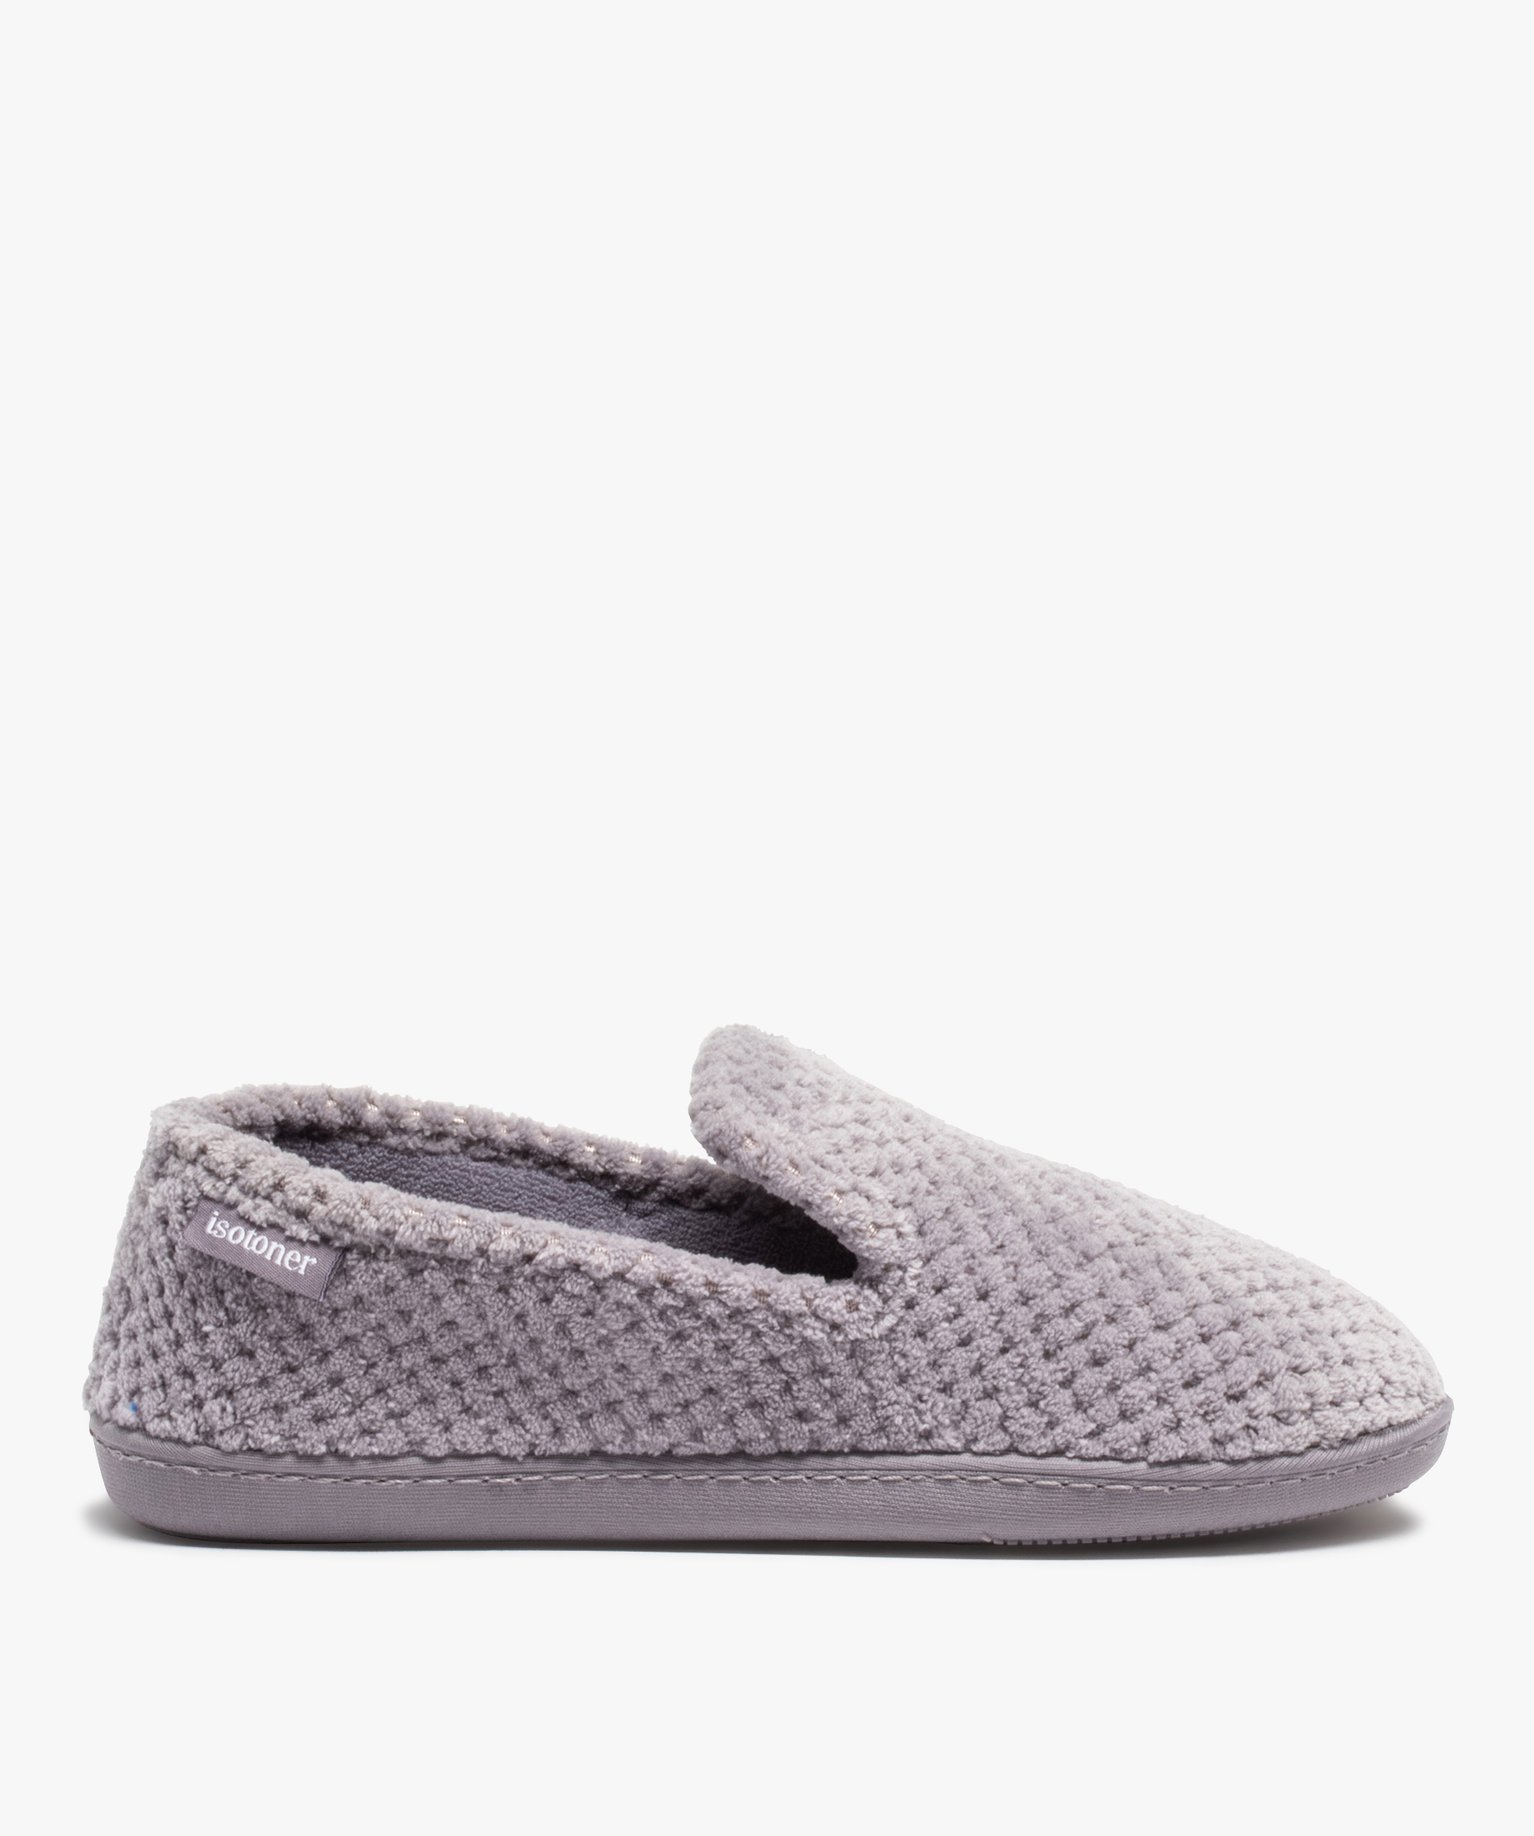 chaussons femme forme charentaise - isotoner gris